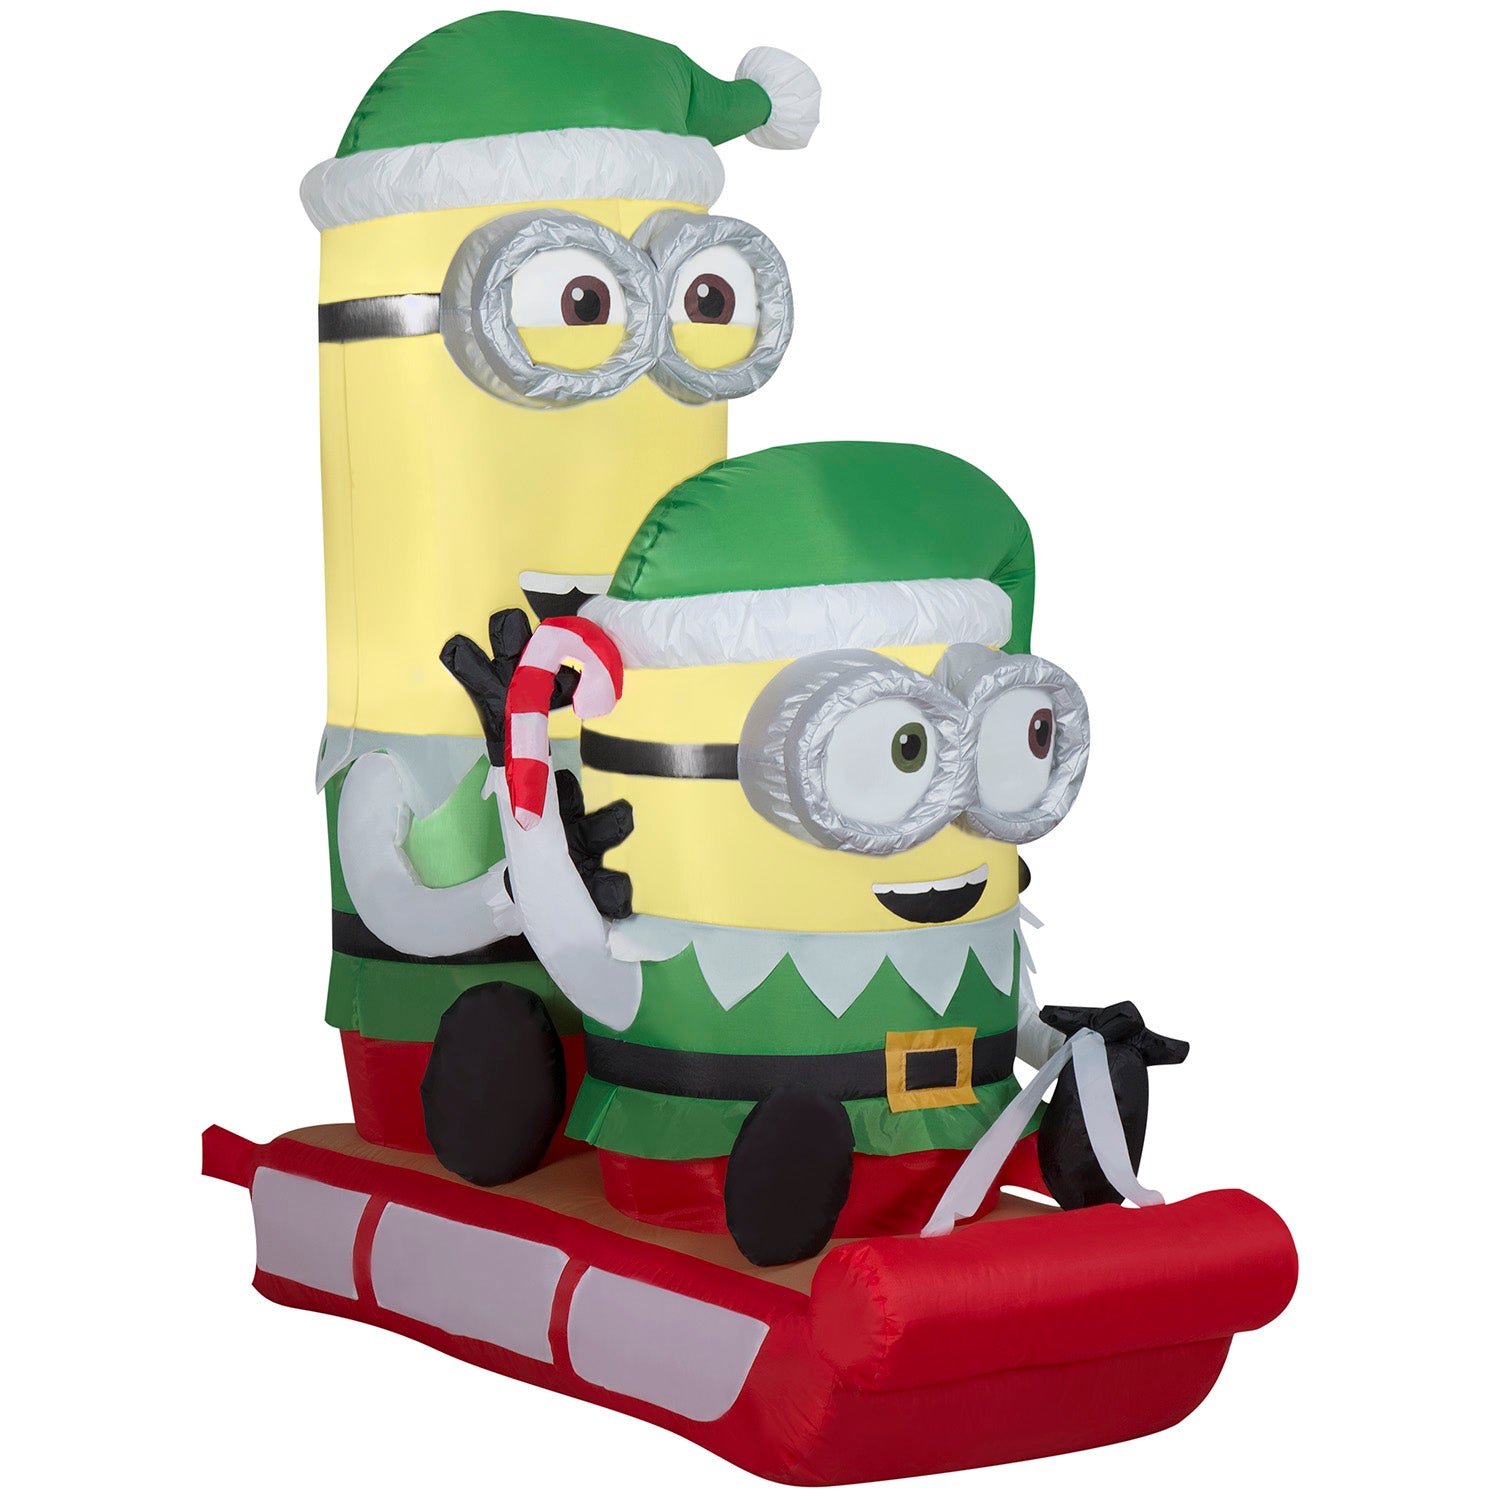 Gemmy Christmas Airblown Inflatable Minions on Sled Scene Universal, 4.5 ft Tall, Green